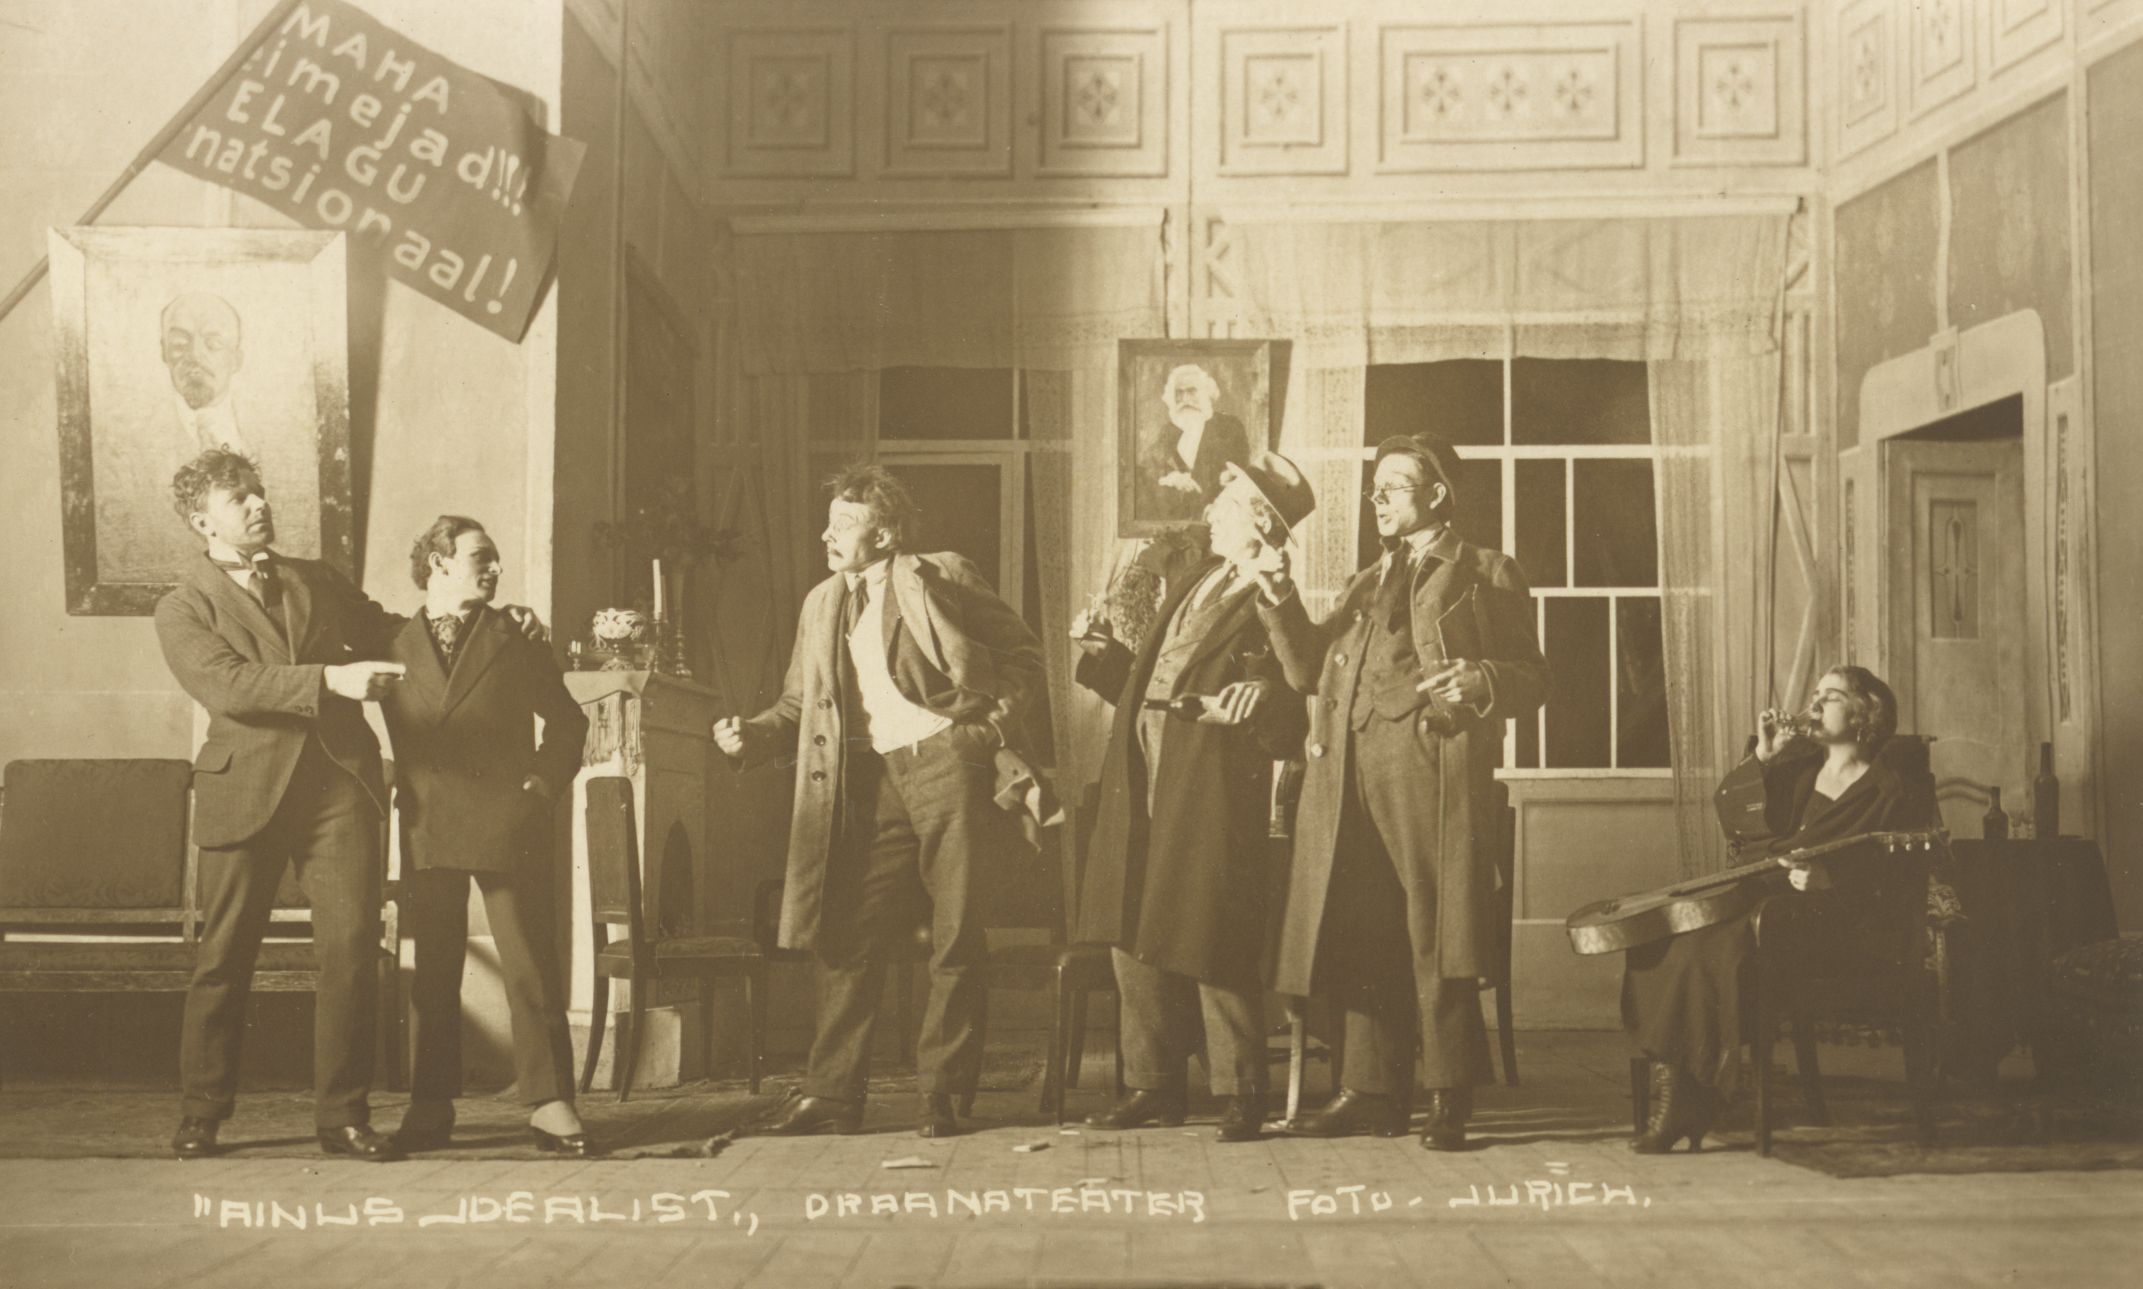 Jaan Kärner's Comedy "The One Idealist" in Drama Theatre